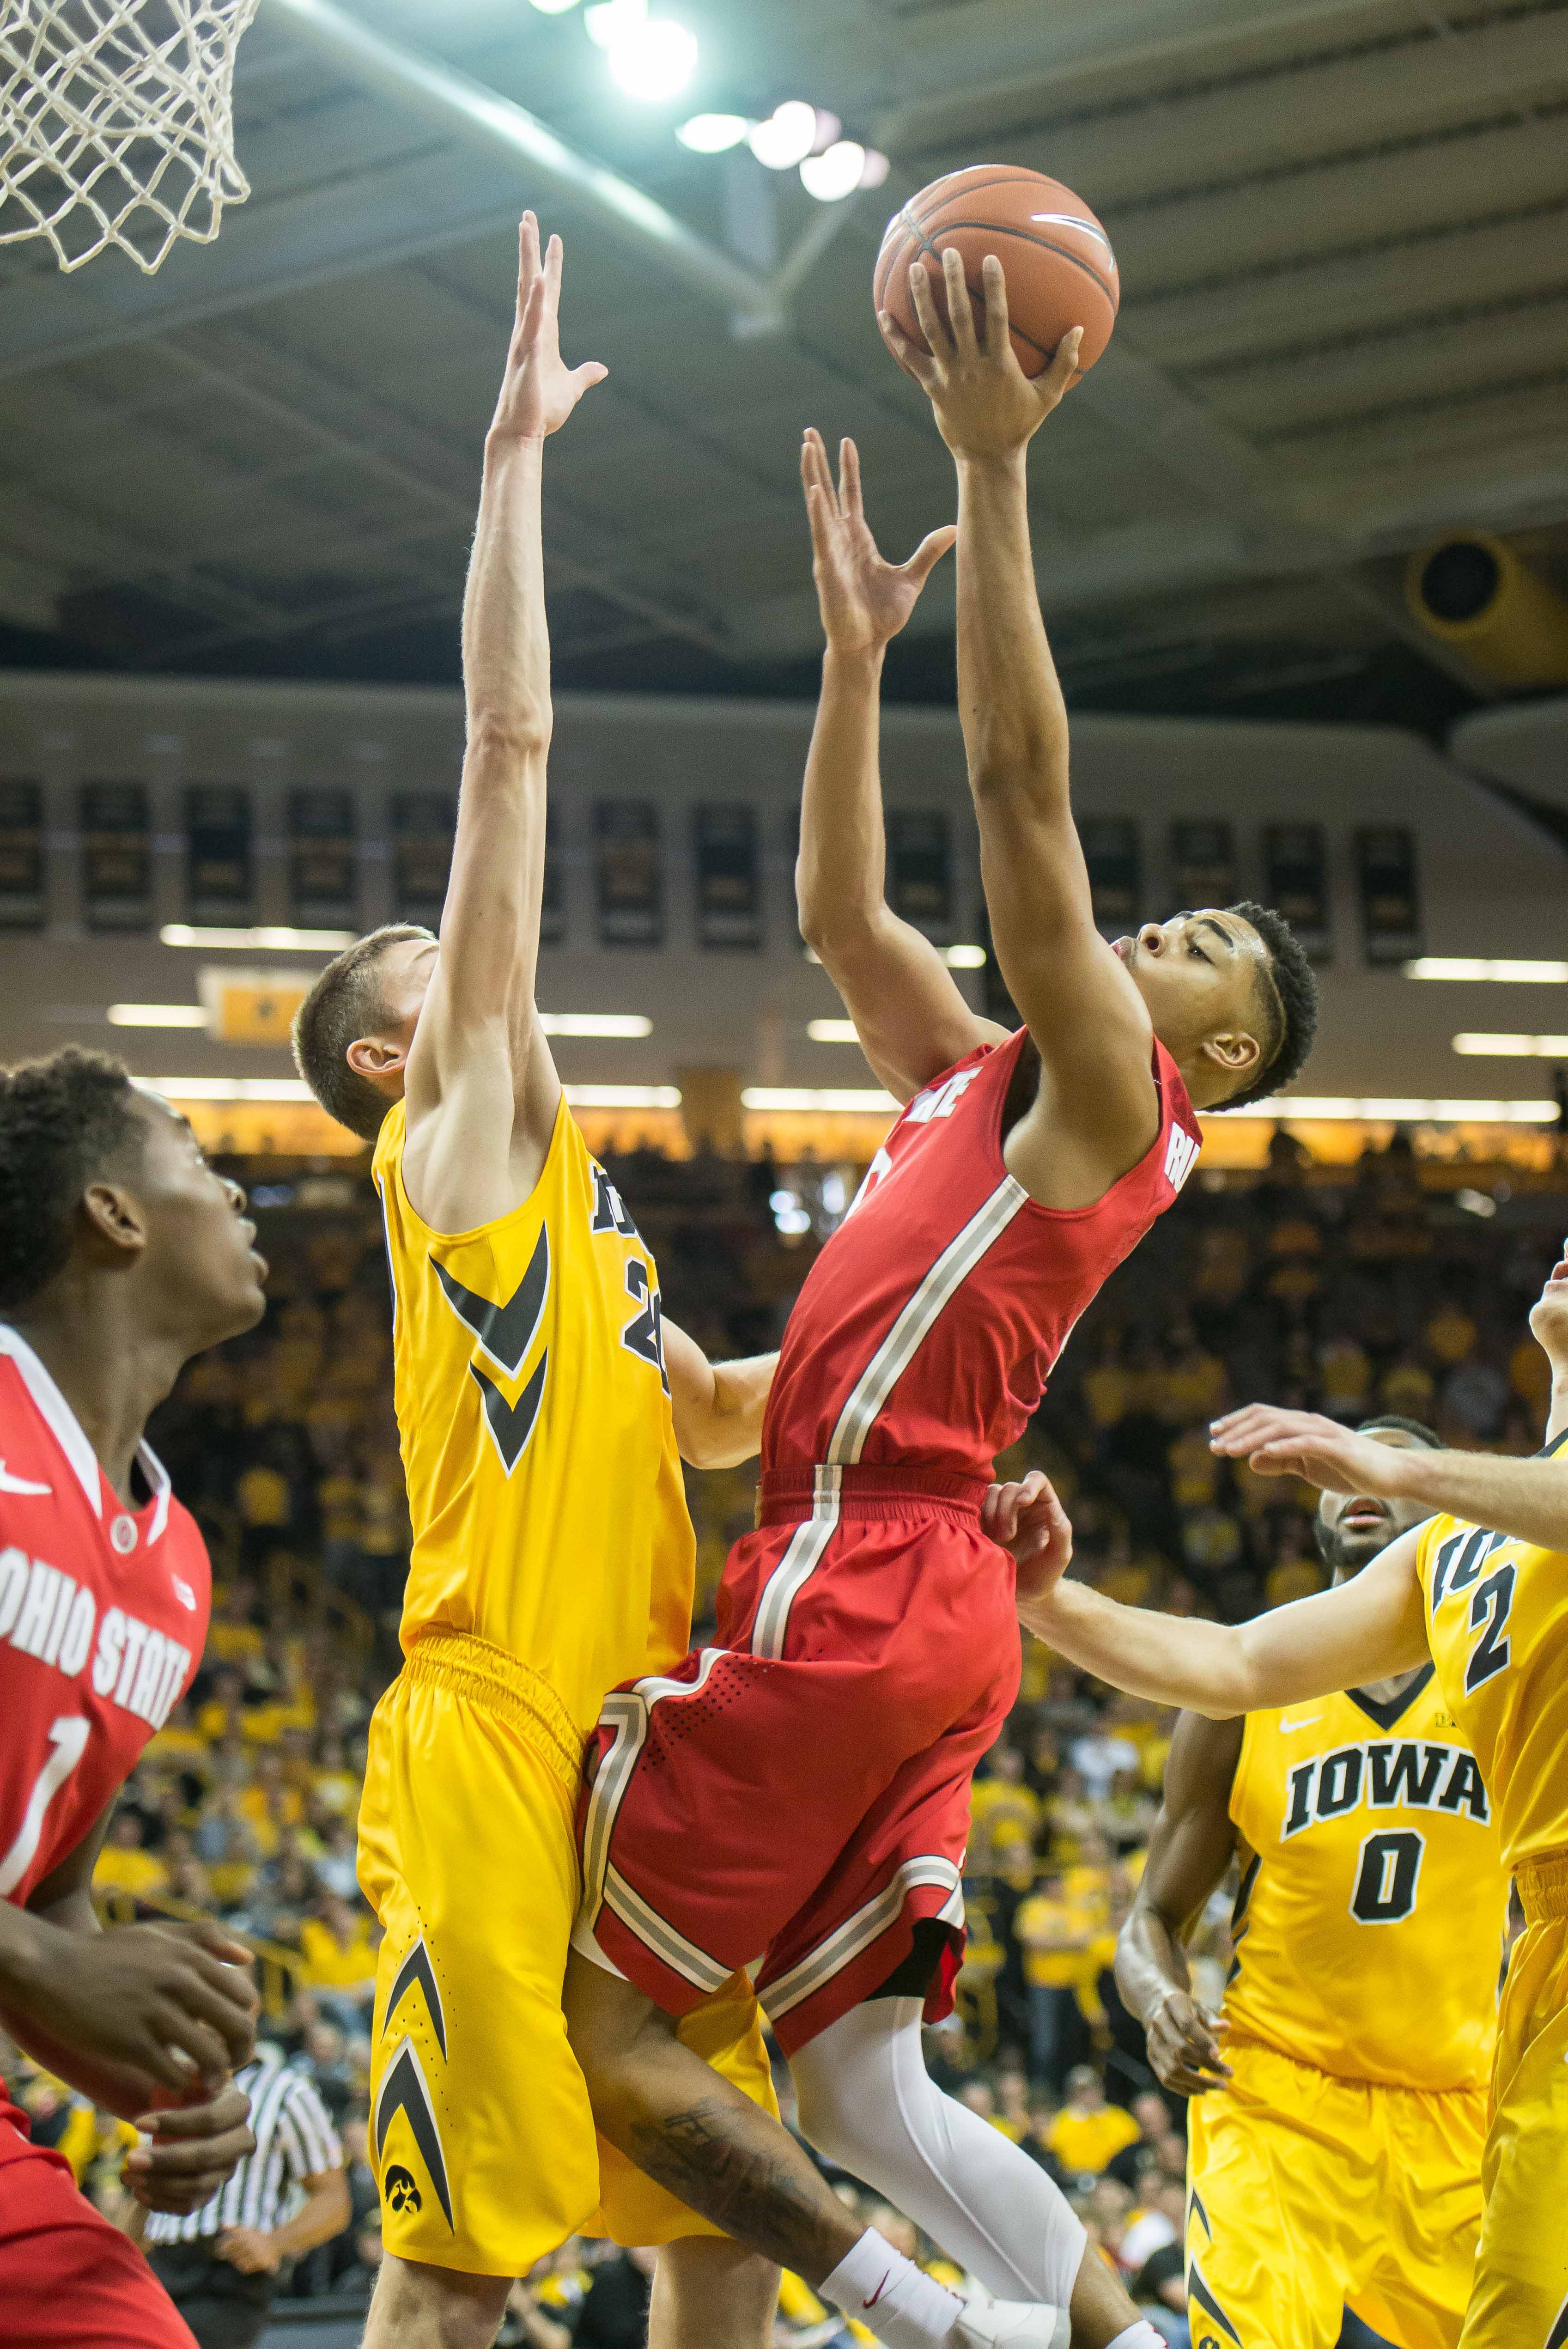 Jan 17, 2015; Iowa City, IA, USA; Ohio State Buckeyes guard D'Angelo Russell (0) goes to the basket against Iowa Hawkeyes forward Jarrod Uthoff (20) during the first half at Carver-Hawkeye Arena. Mandatory Credit: Jeffrey Becker-USA TODAY Sports